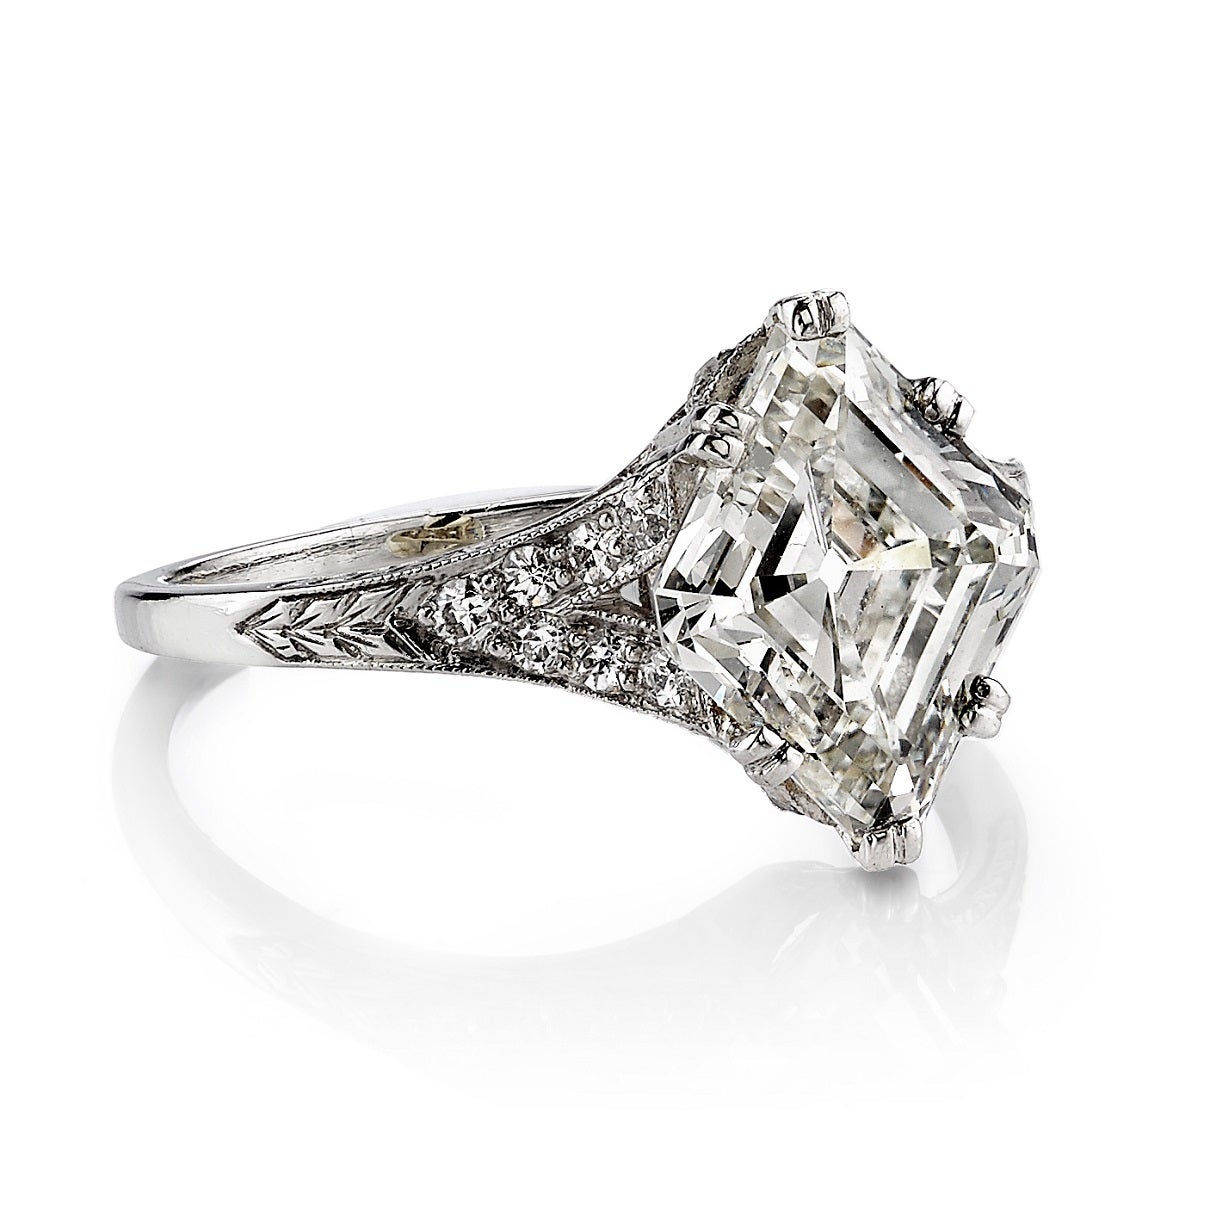 2.73ct K/VS1 GIA certified Lozenge cut diamond set in a vintage platinum mounting. Circa 1920. A bold yet feminine design makes this Art Deco engagement ring a true classic.